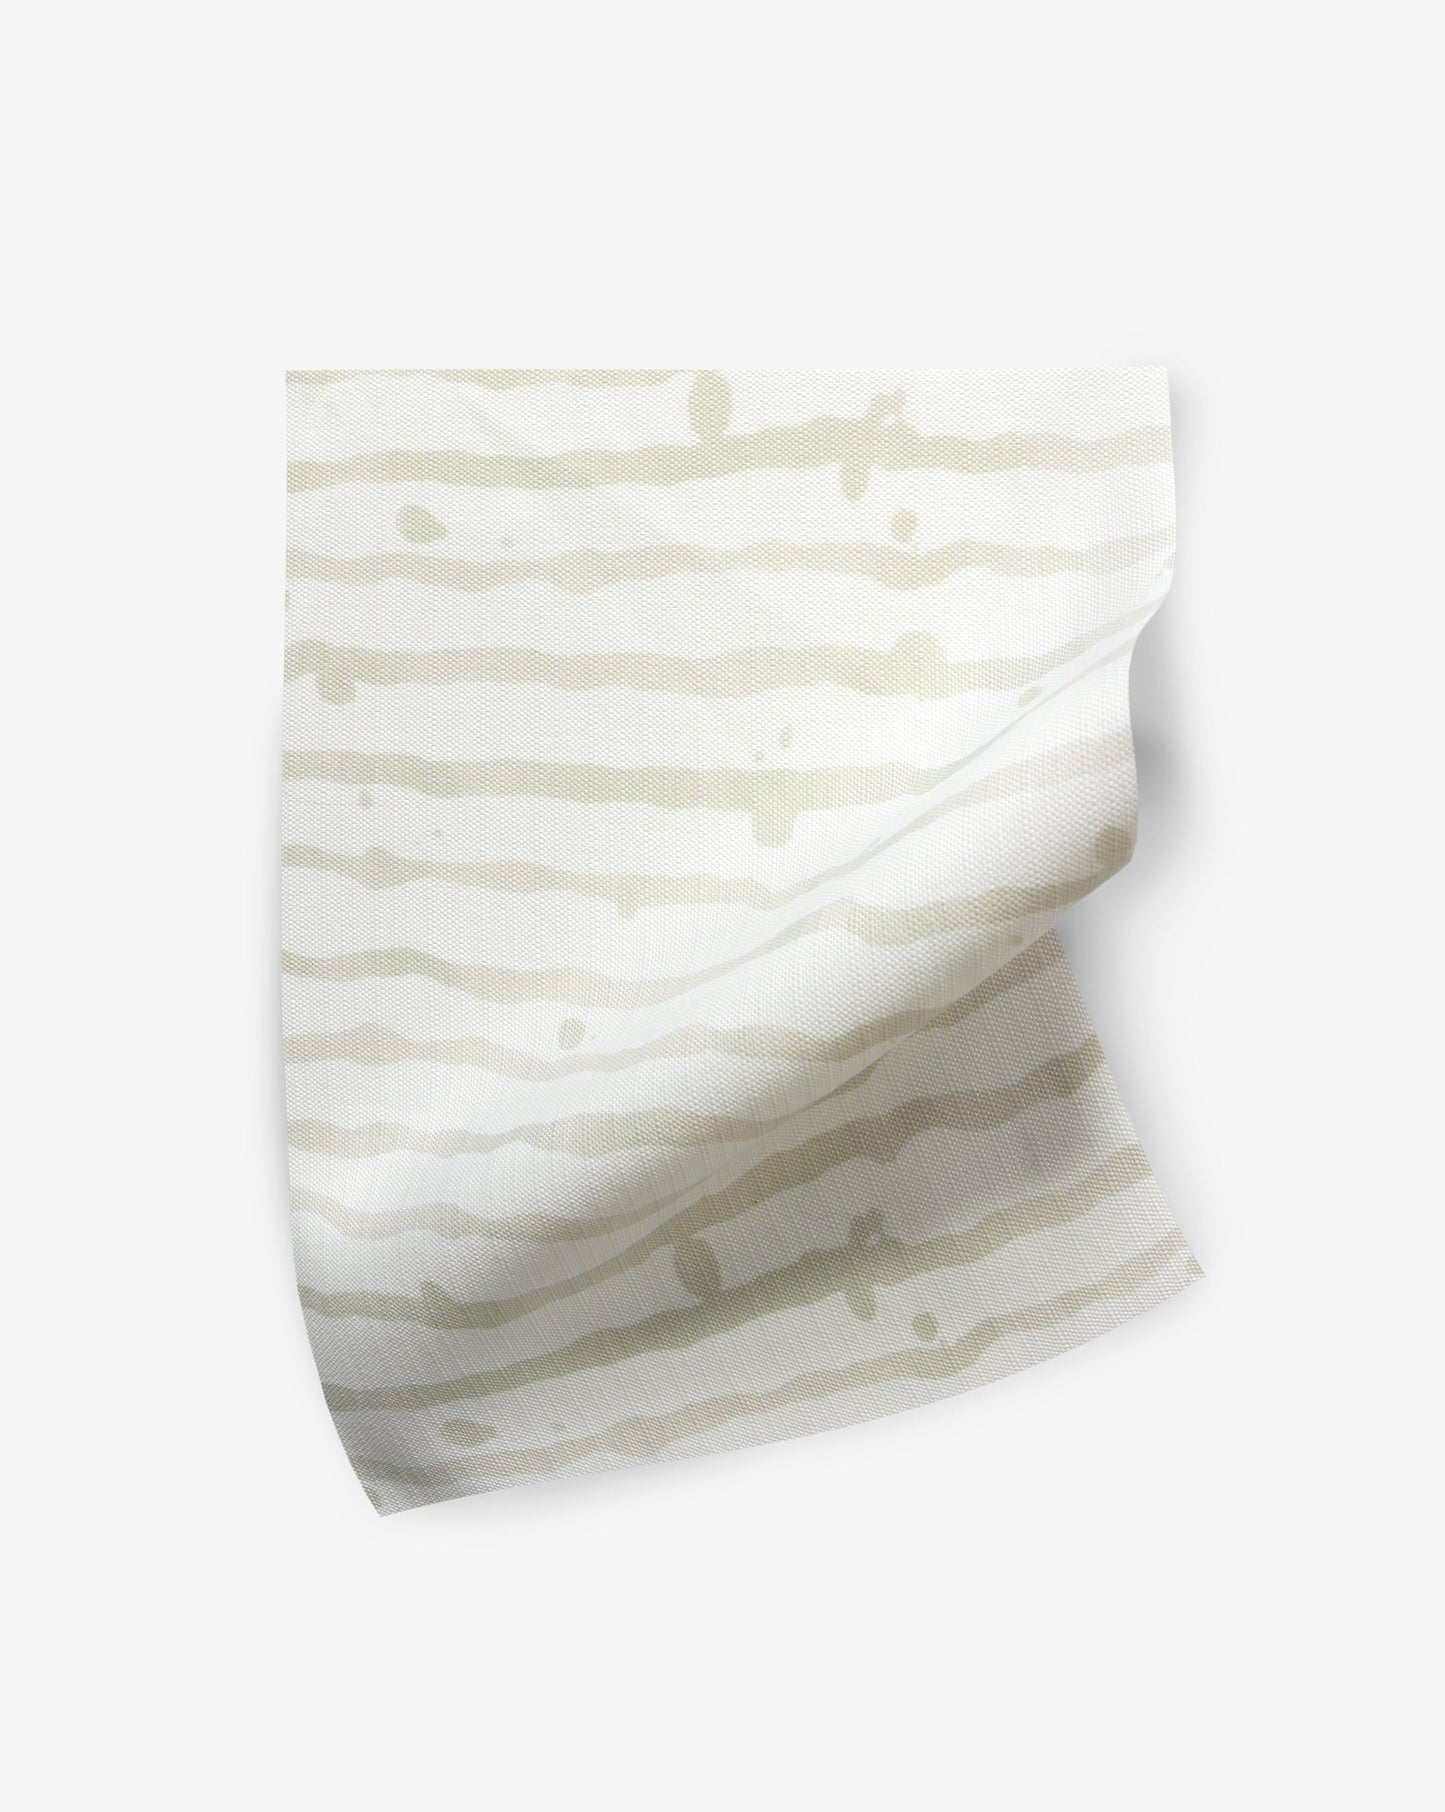 A Drippy Stripe Performance Fabric Sand with a nautical colors pattern on top of a white background